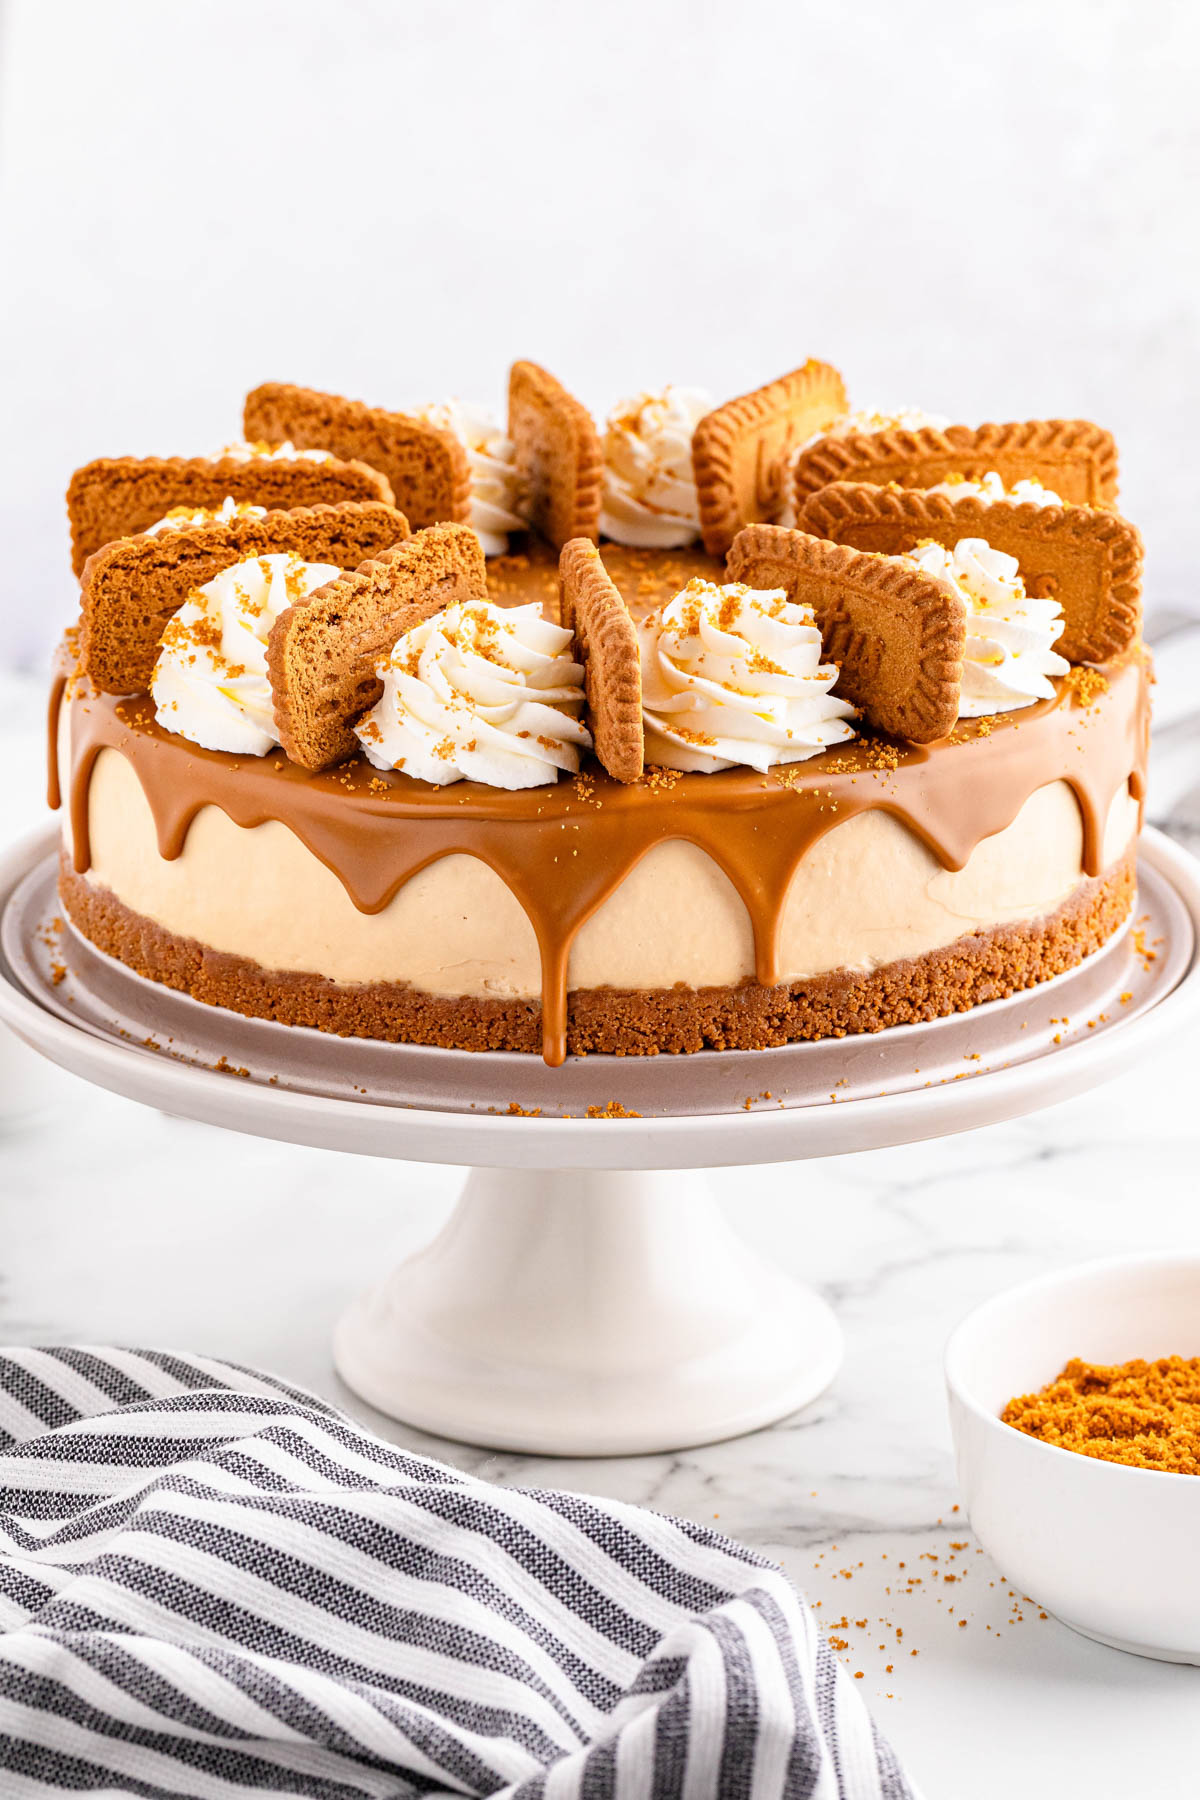 A cheesecake on a cake stand with whipped cream on top.